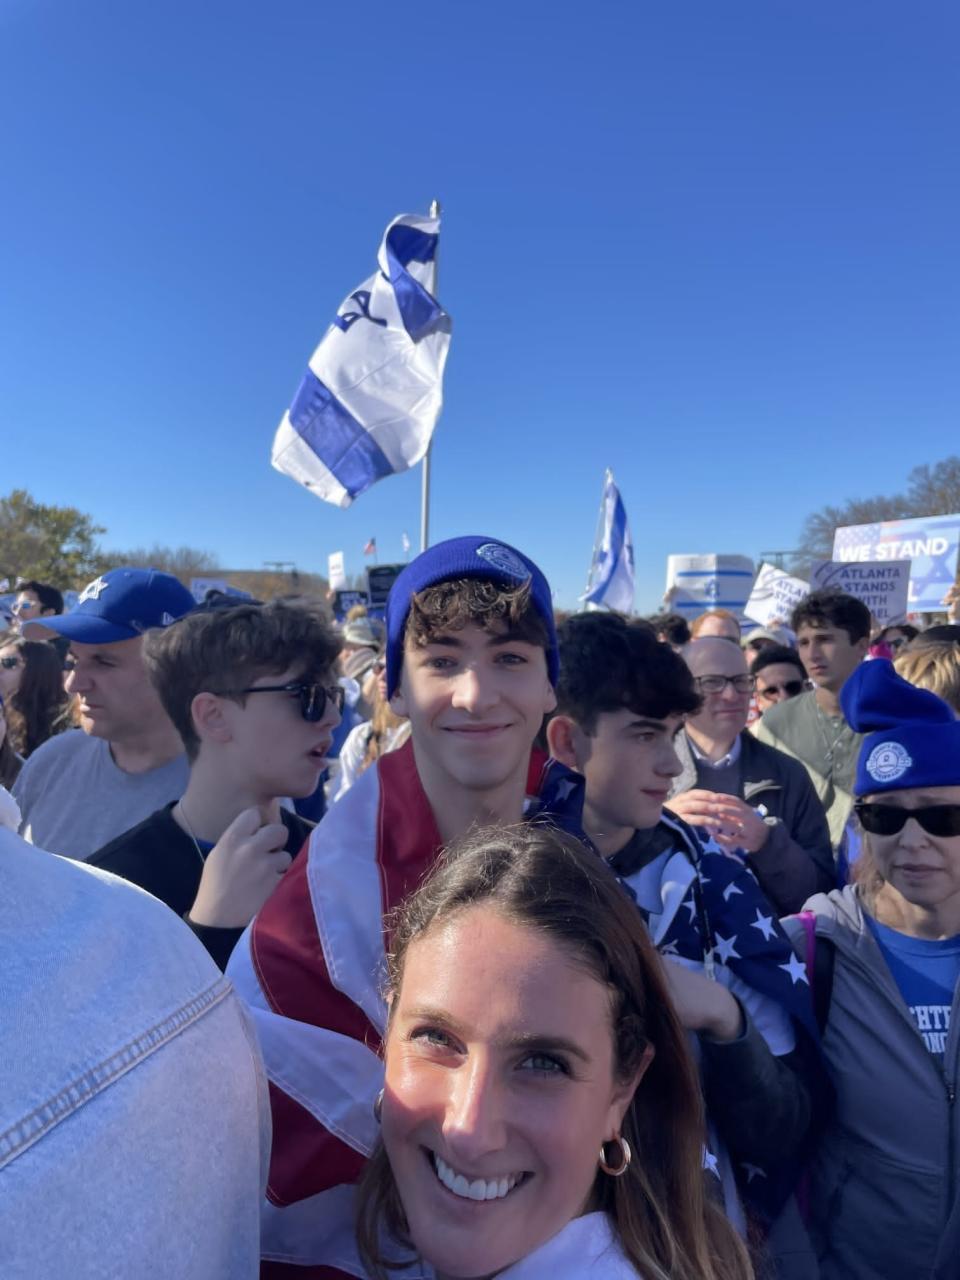 Ari Duftler (center) of Long Island, at the Nov. 14 rally in Washington D.C. to support Israel and oppose antisemitism. 
The 16-year-old went to school with an Israeli soldier believed taken hostage by Hamas.
(Credit: Courtesy of Ari Duftler)